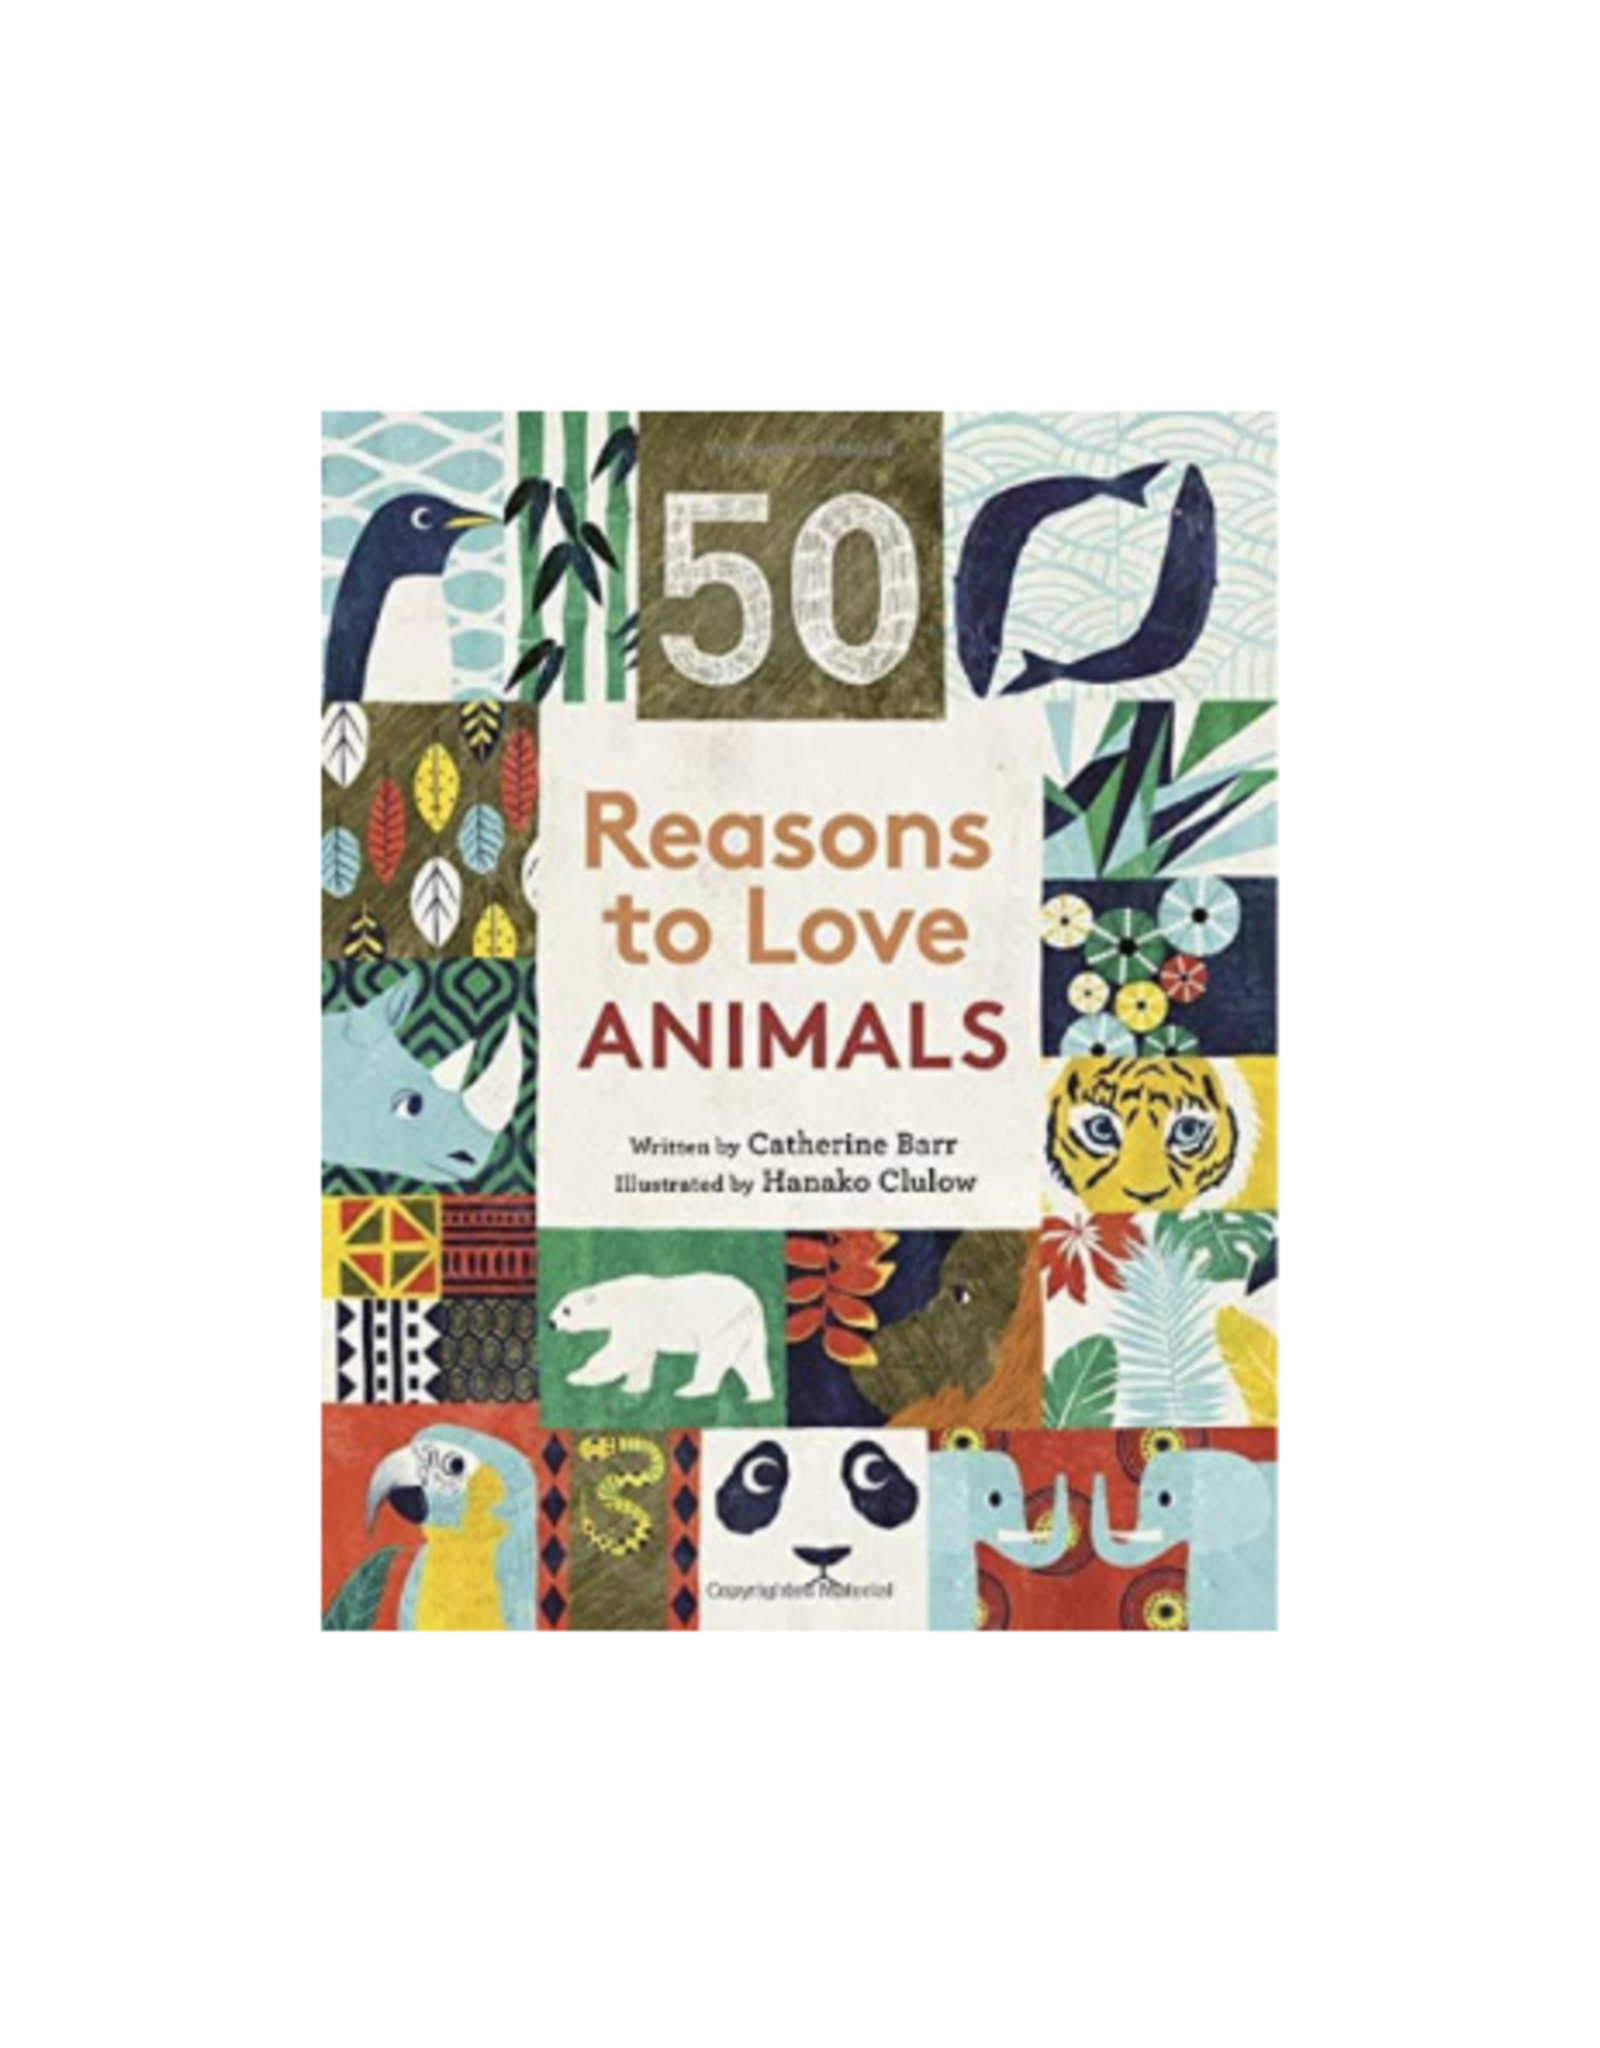 50 Reasons To Love Animals by: Catherine Barr